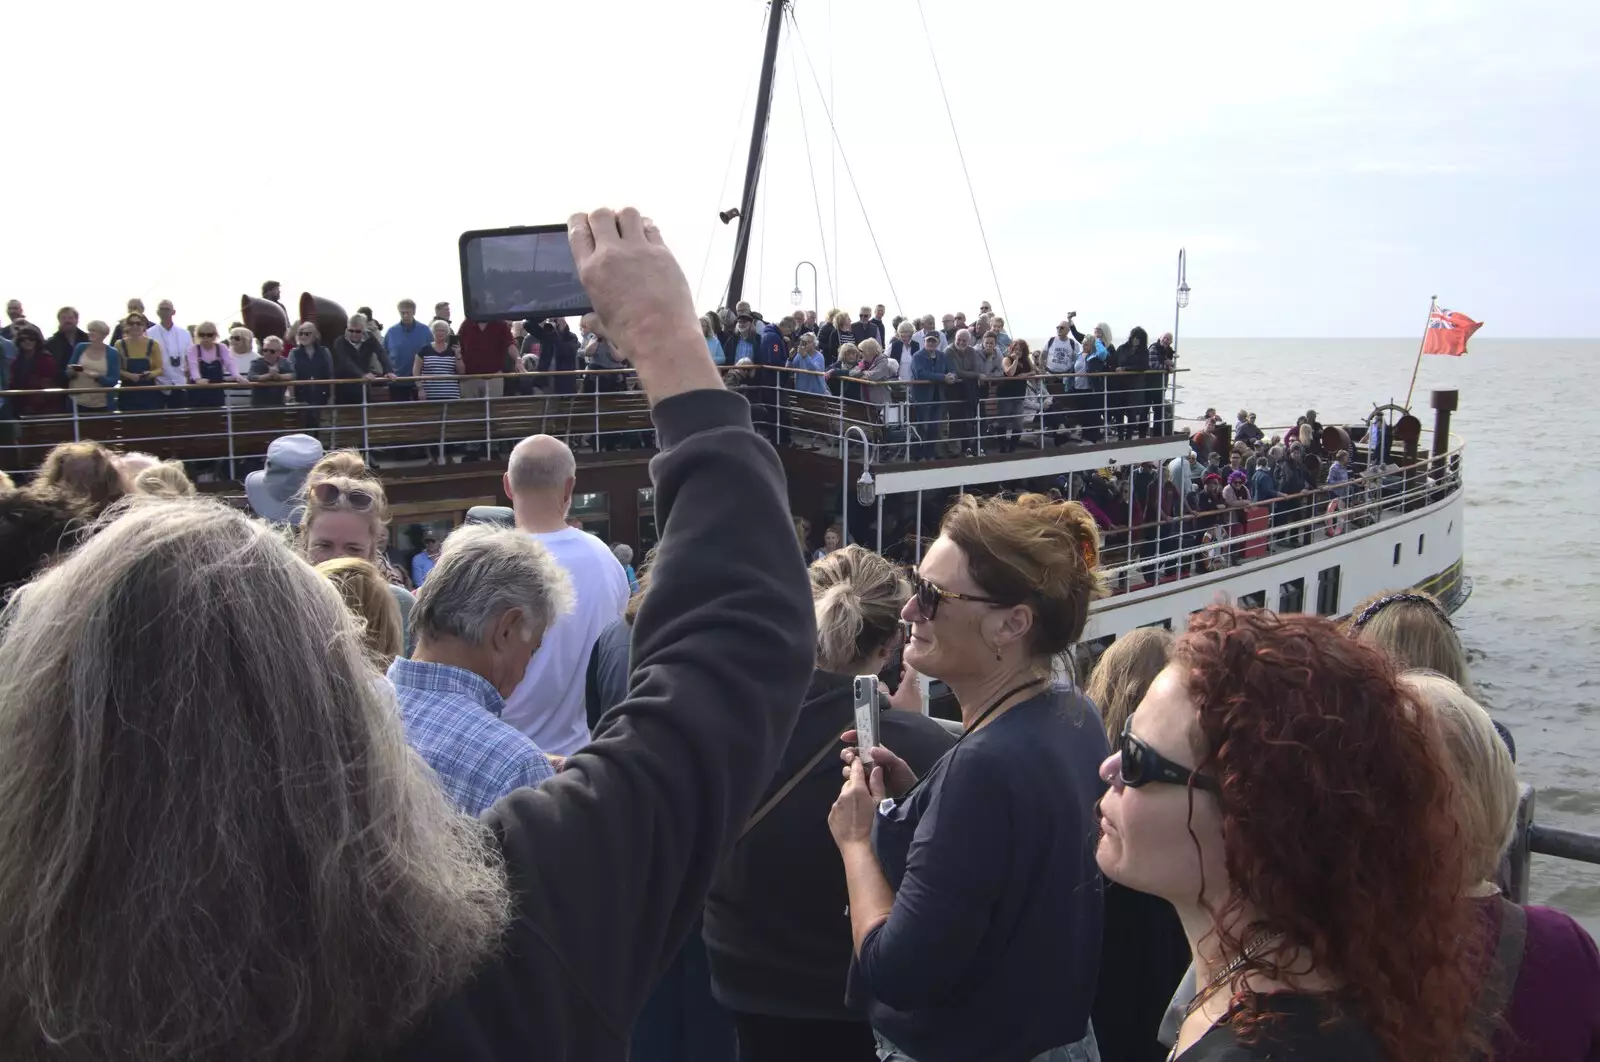 The boat and the pier are packed, from The Waverley Paddle Steamer at Southwold Pier, Suffolk - 27th September 2023